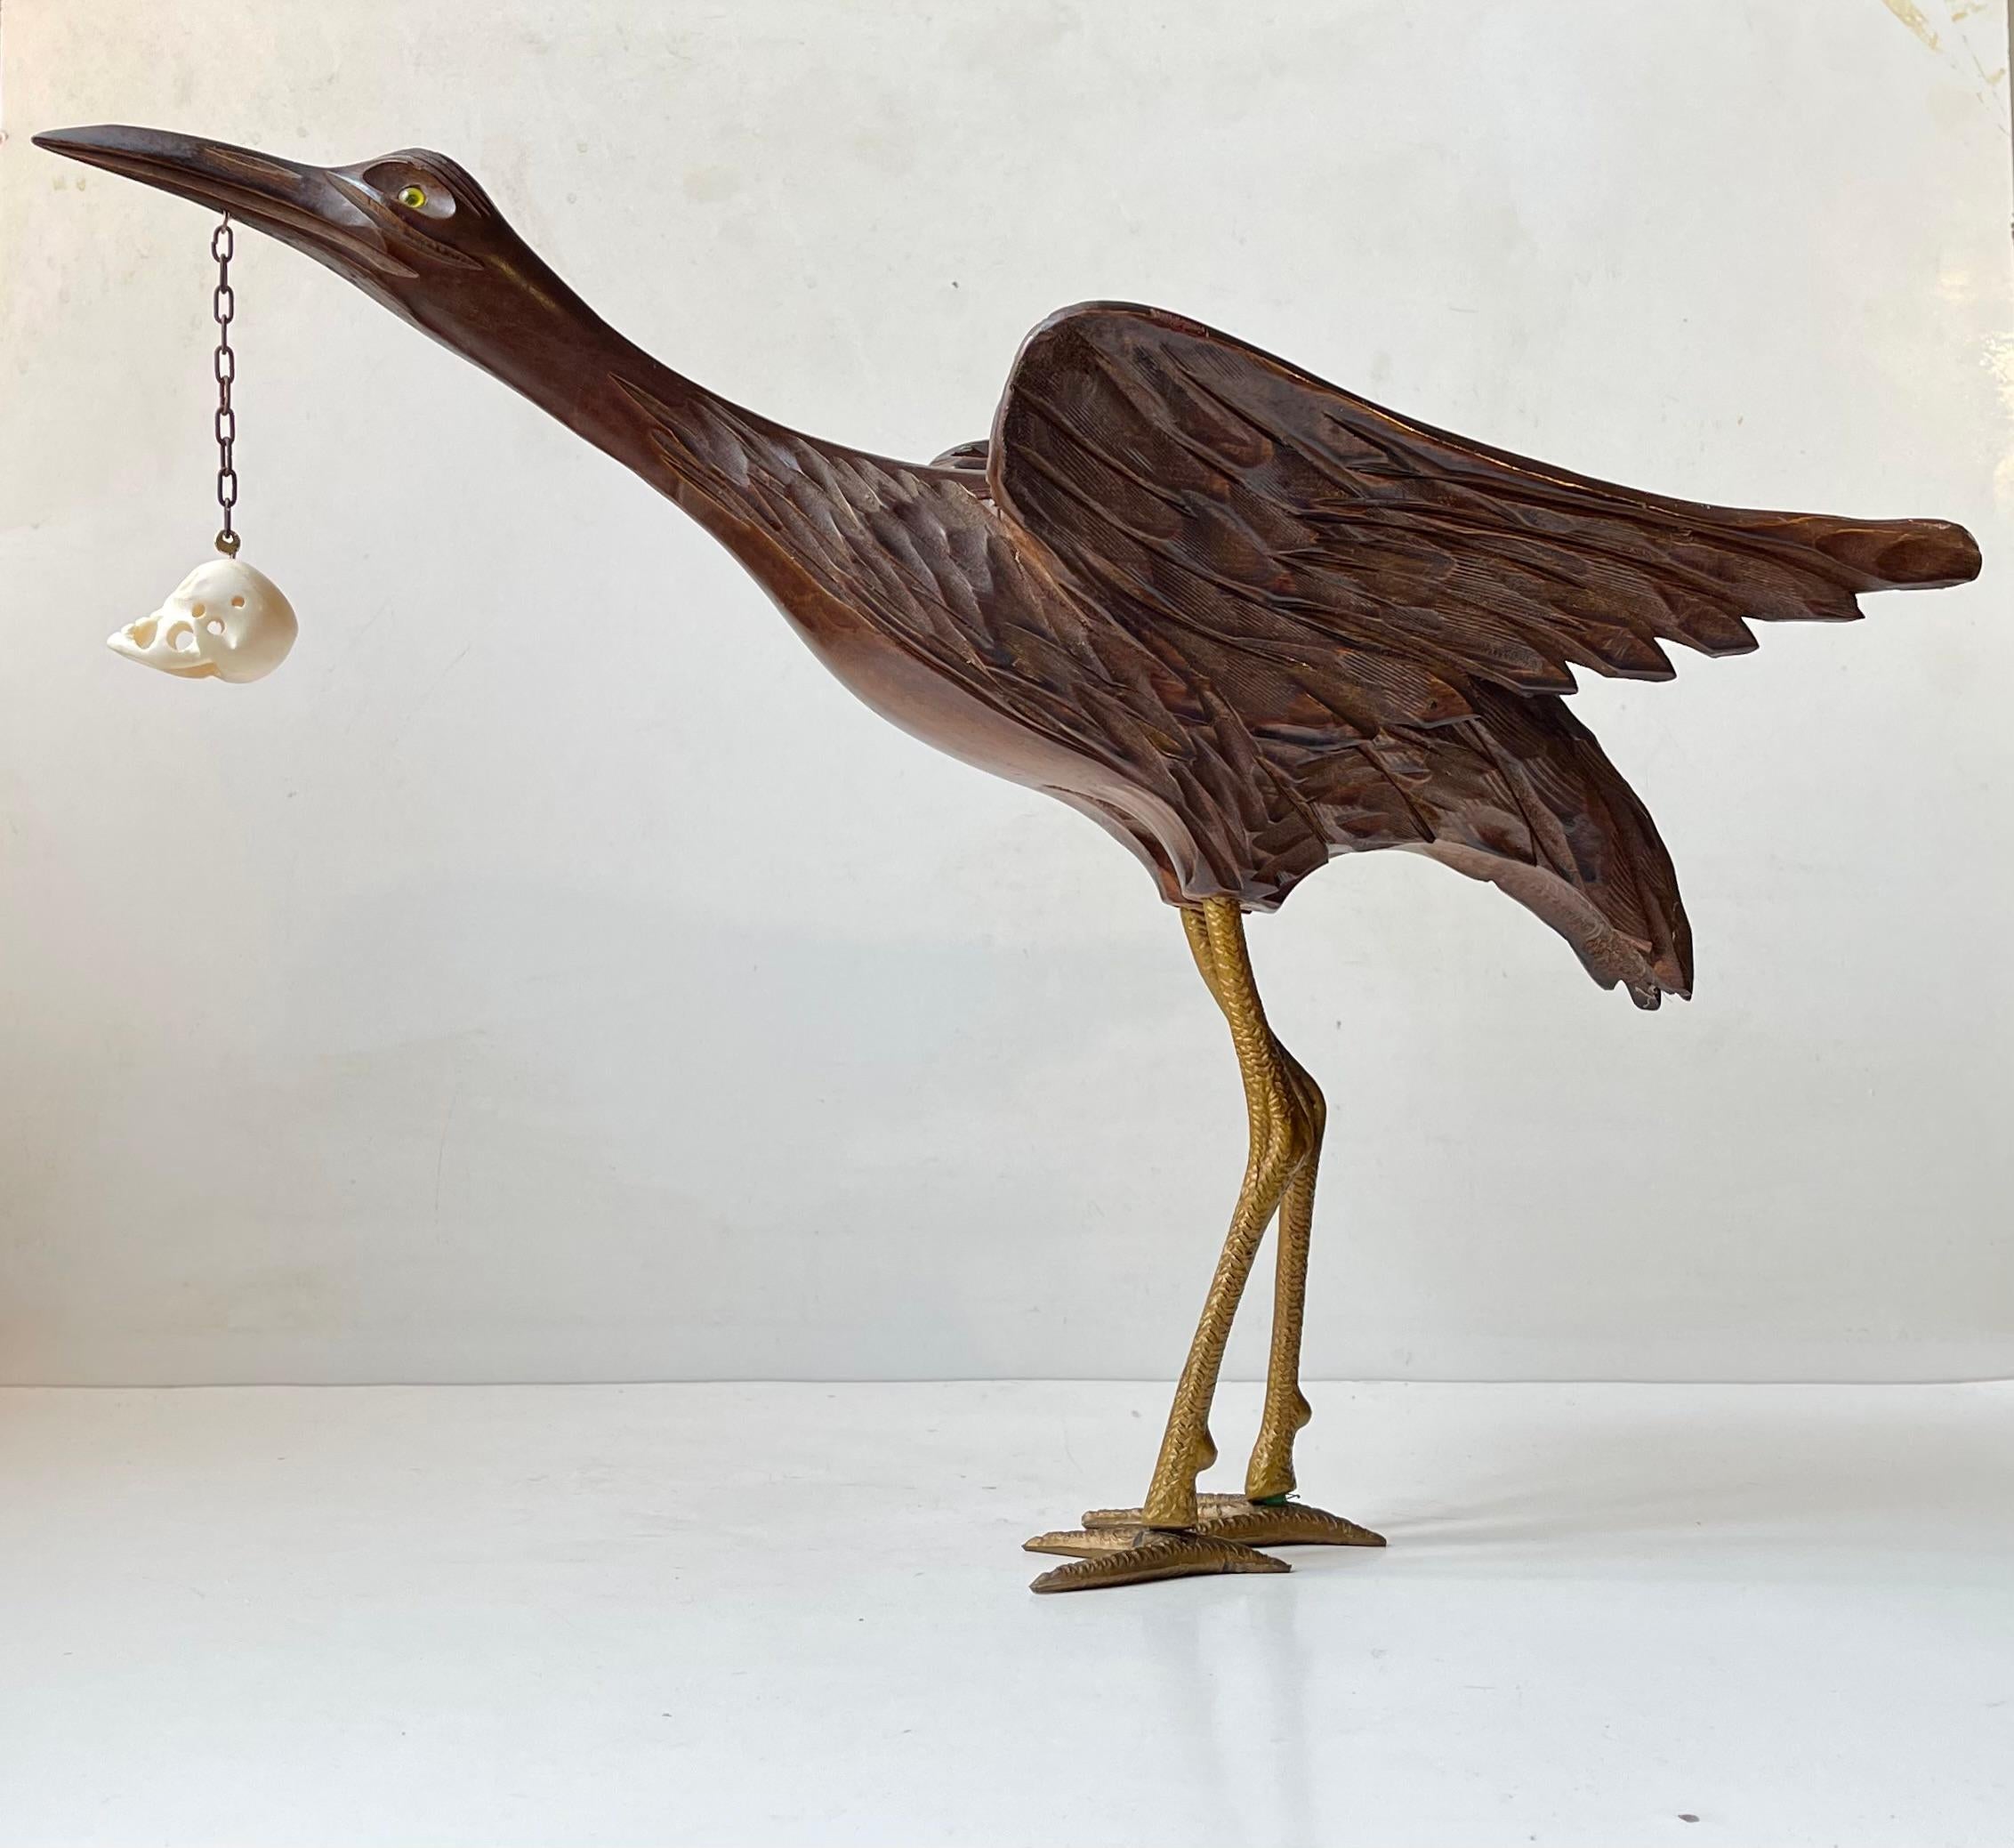 Majestic semi-peculiar and possibly up-cycled/repurposed sculpture. It depicts a detailed crane in carved dark brown wood with glass eyes holding a suspended skull in white bone from its bea. It legs are made from molded bakelite in a golden